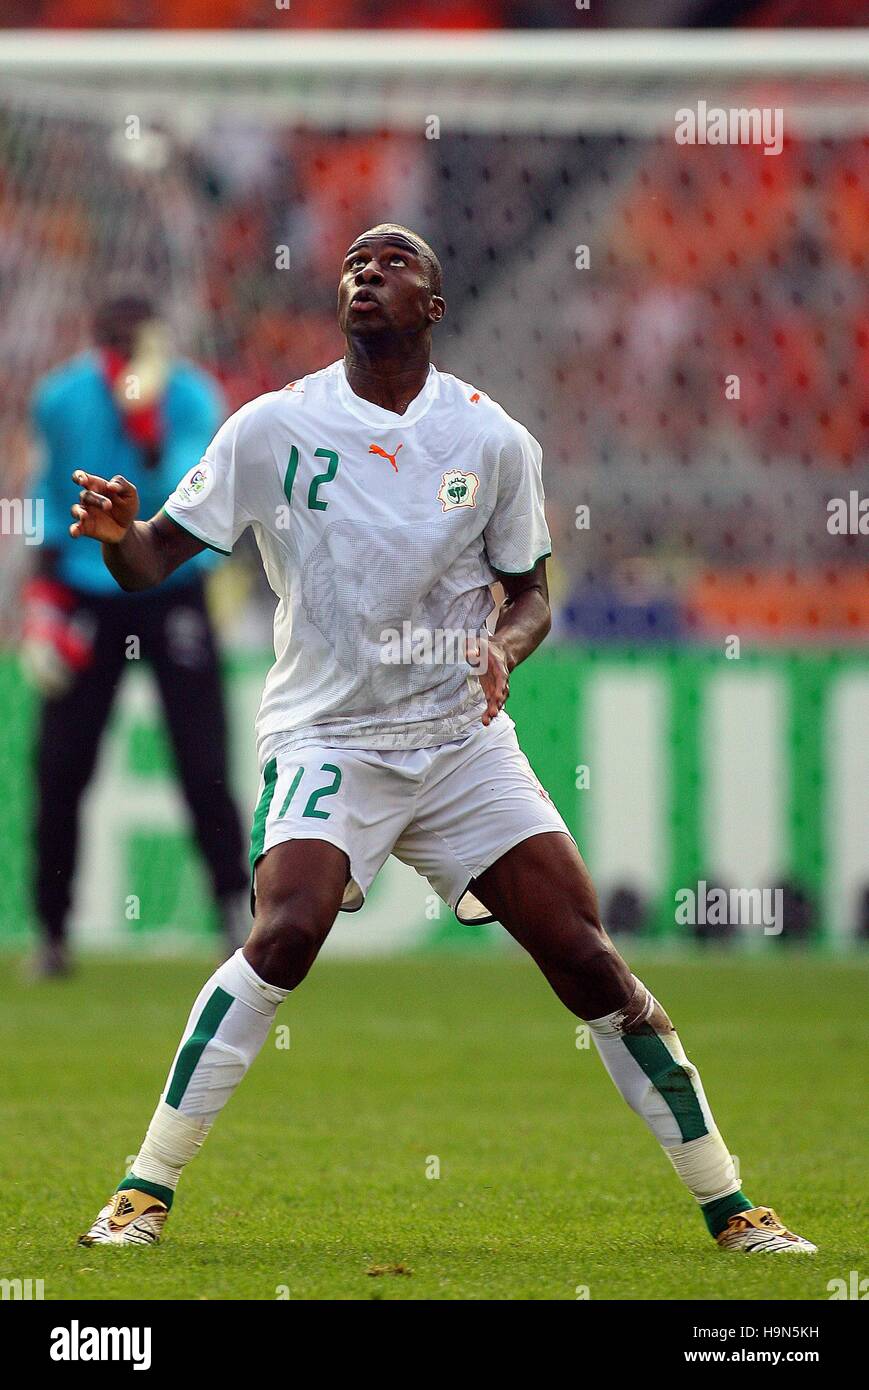 ABDOULAYE MEITE COTE D'IVOIRE & MARSEILLE WORLD CUP STUTTGART GERMANY 16 June 2006 Stock Photo